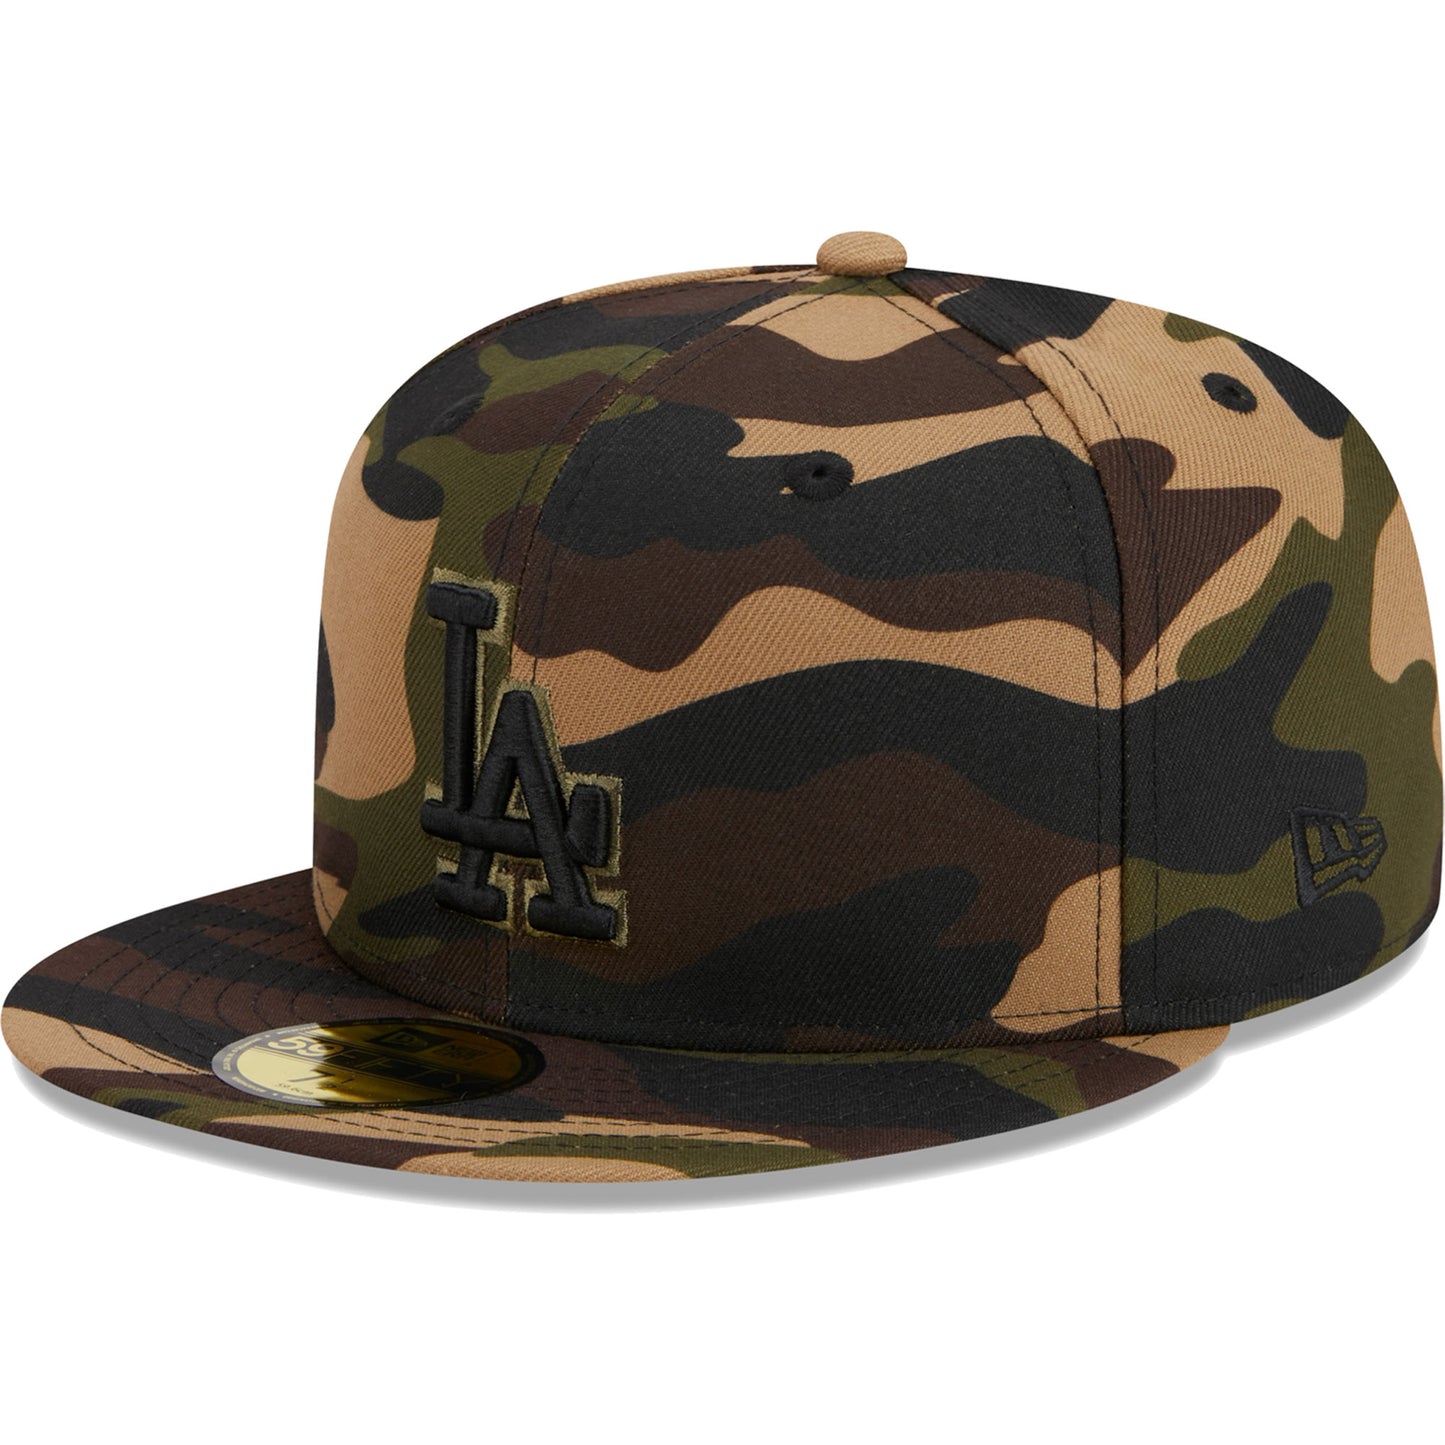 Los Angeles Dodgers New Era Autumn 59FIFTY Fitted Hat - Camo